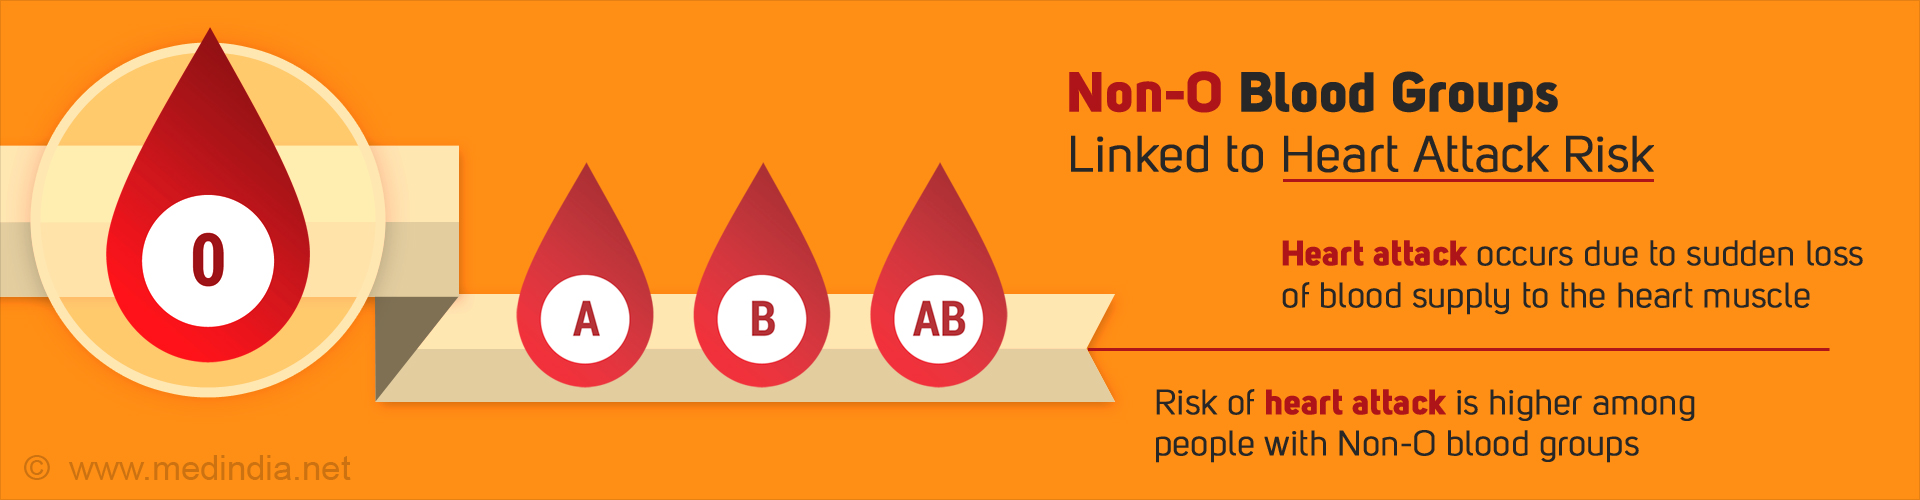 Non-O Blood Groups Linked to Heart Attack Risk

- Heart attack occurs due to sudden loss of blood supply to the heart muscle
- Risk of heart attack is higher among people with Non-O blood groups